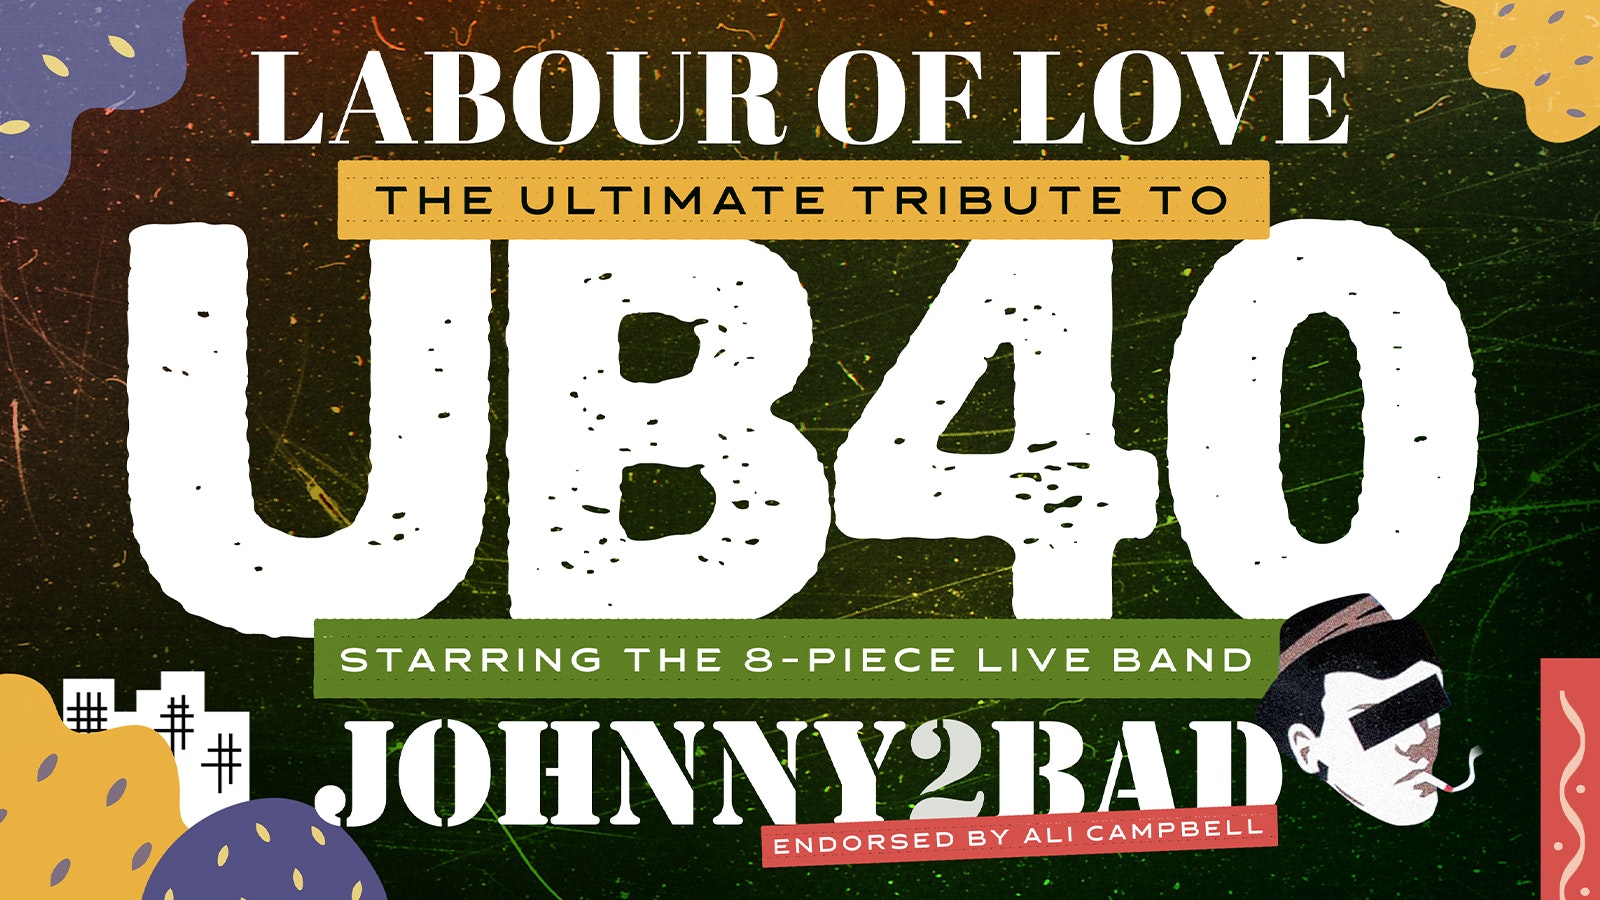 ❤️💛💚 Labour of Love – UB40’s Greatest Hits Show starring JOHNNY 2 BAD – endorsed by Ali Campbell